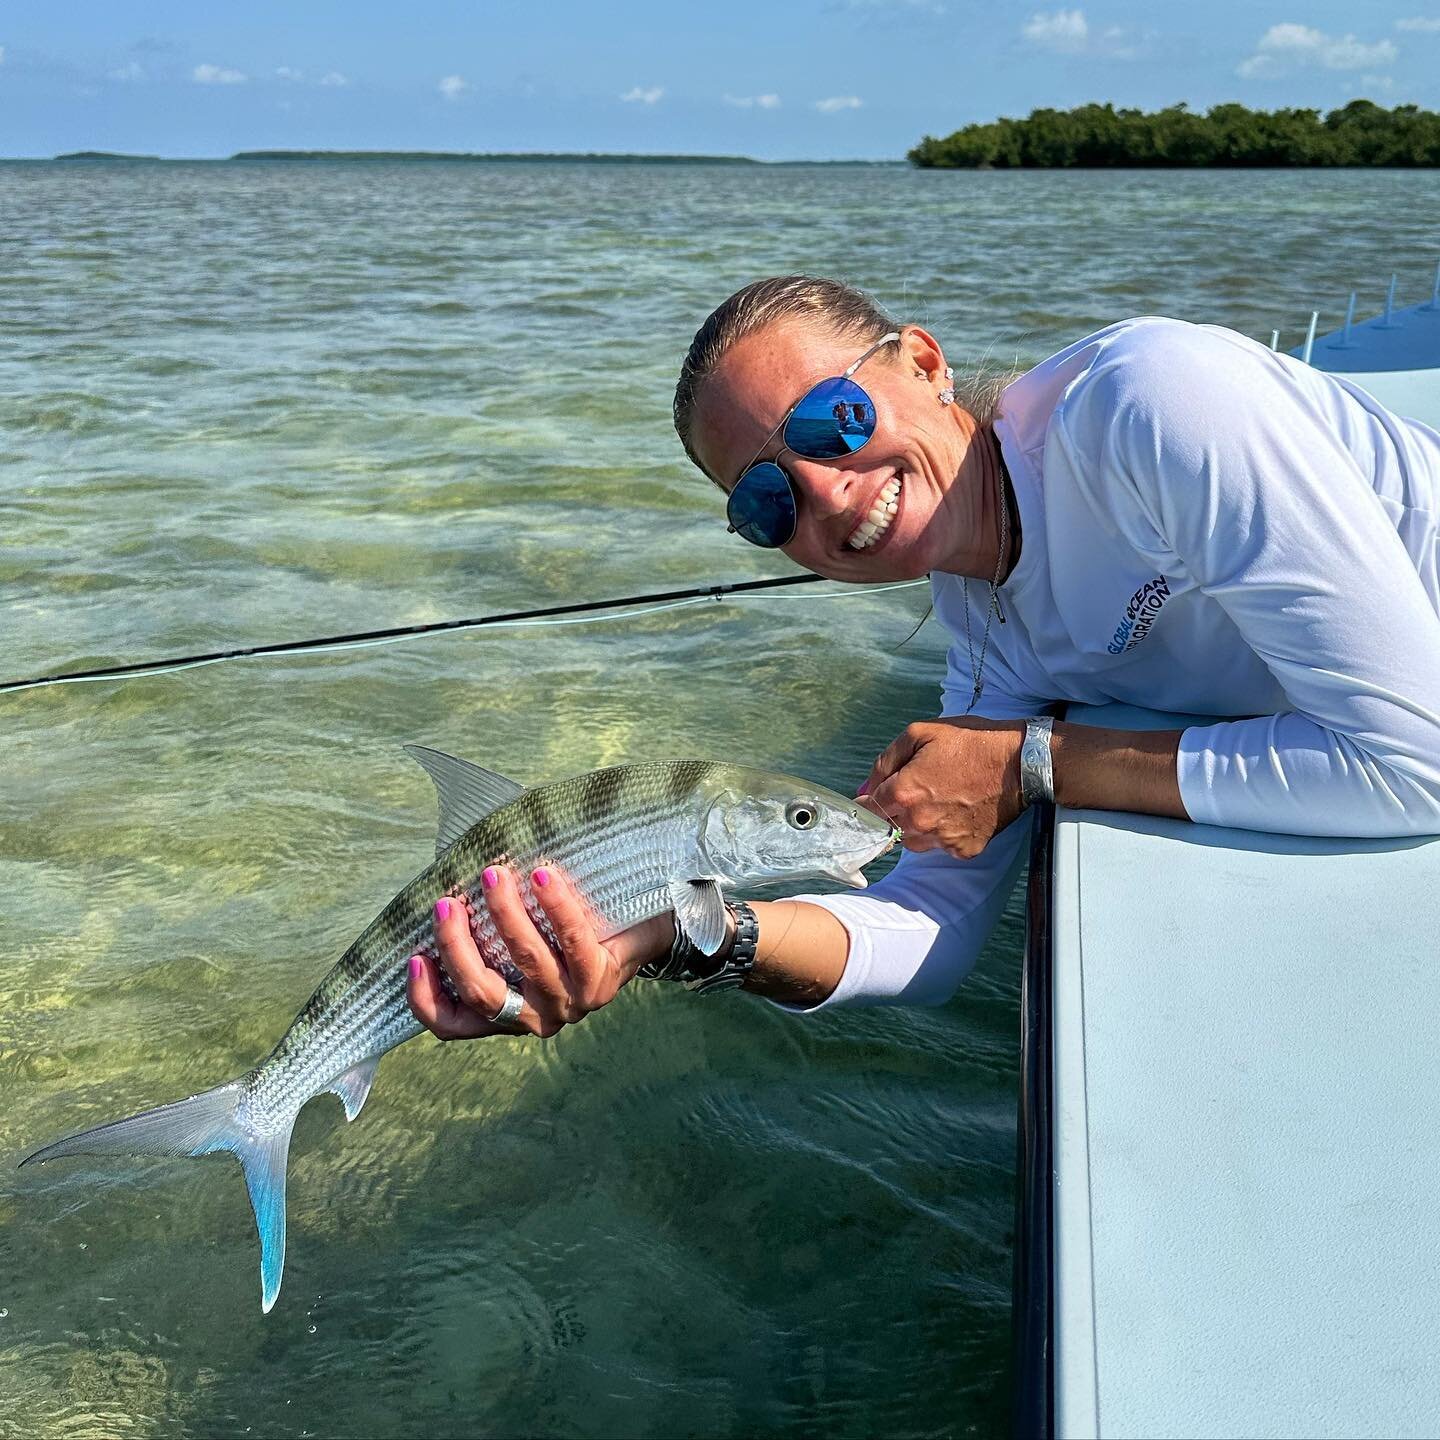 My first Florida Keys Bonefish in one of the most magical settings on the planet! Had a blast on the flats with best of the best, @captainpauldixon yesterday before my talk at the Key West Library. Work hard, play harder! 

#keywest #bonefish #flkeys